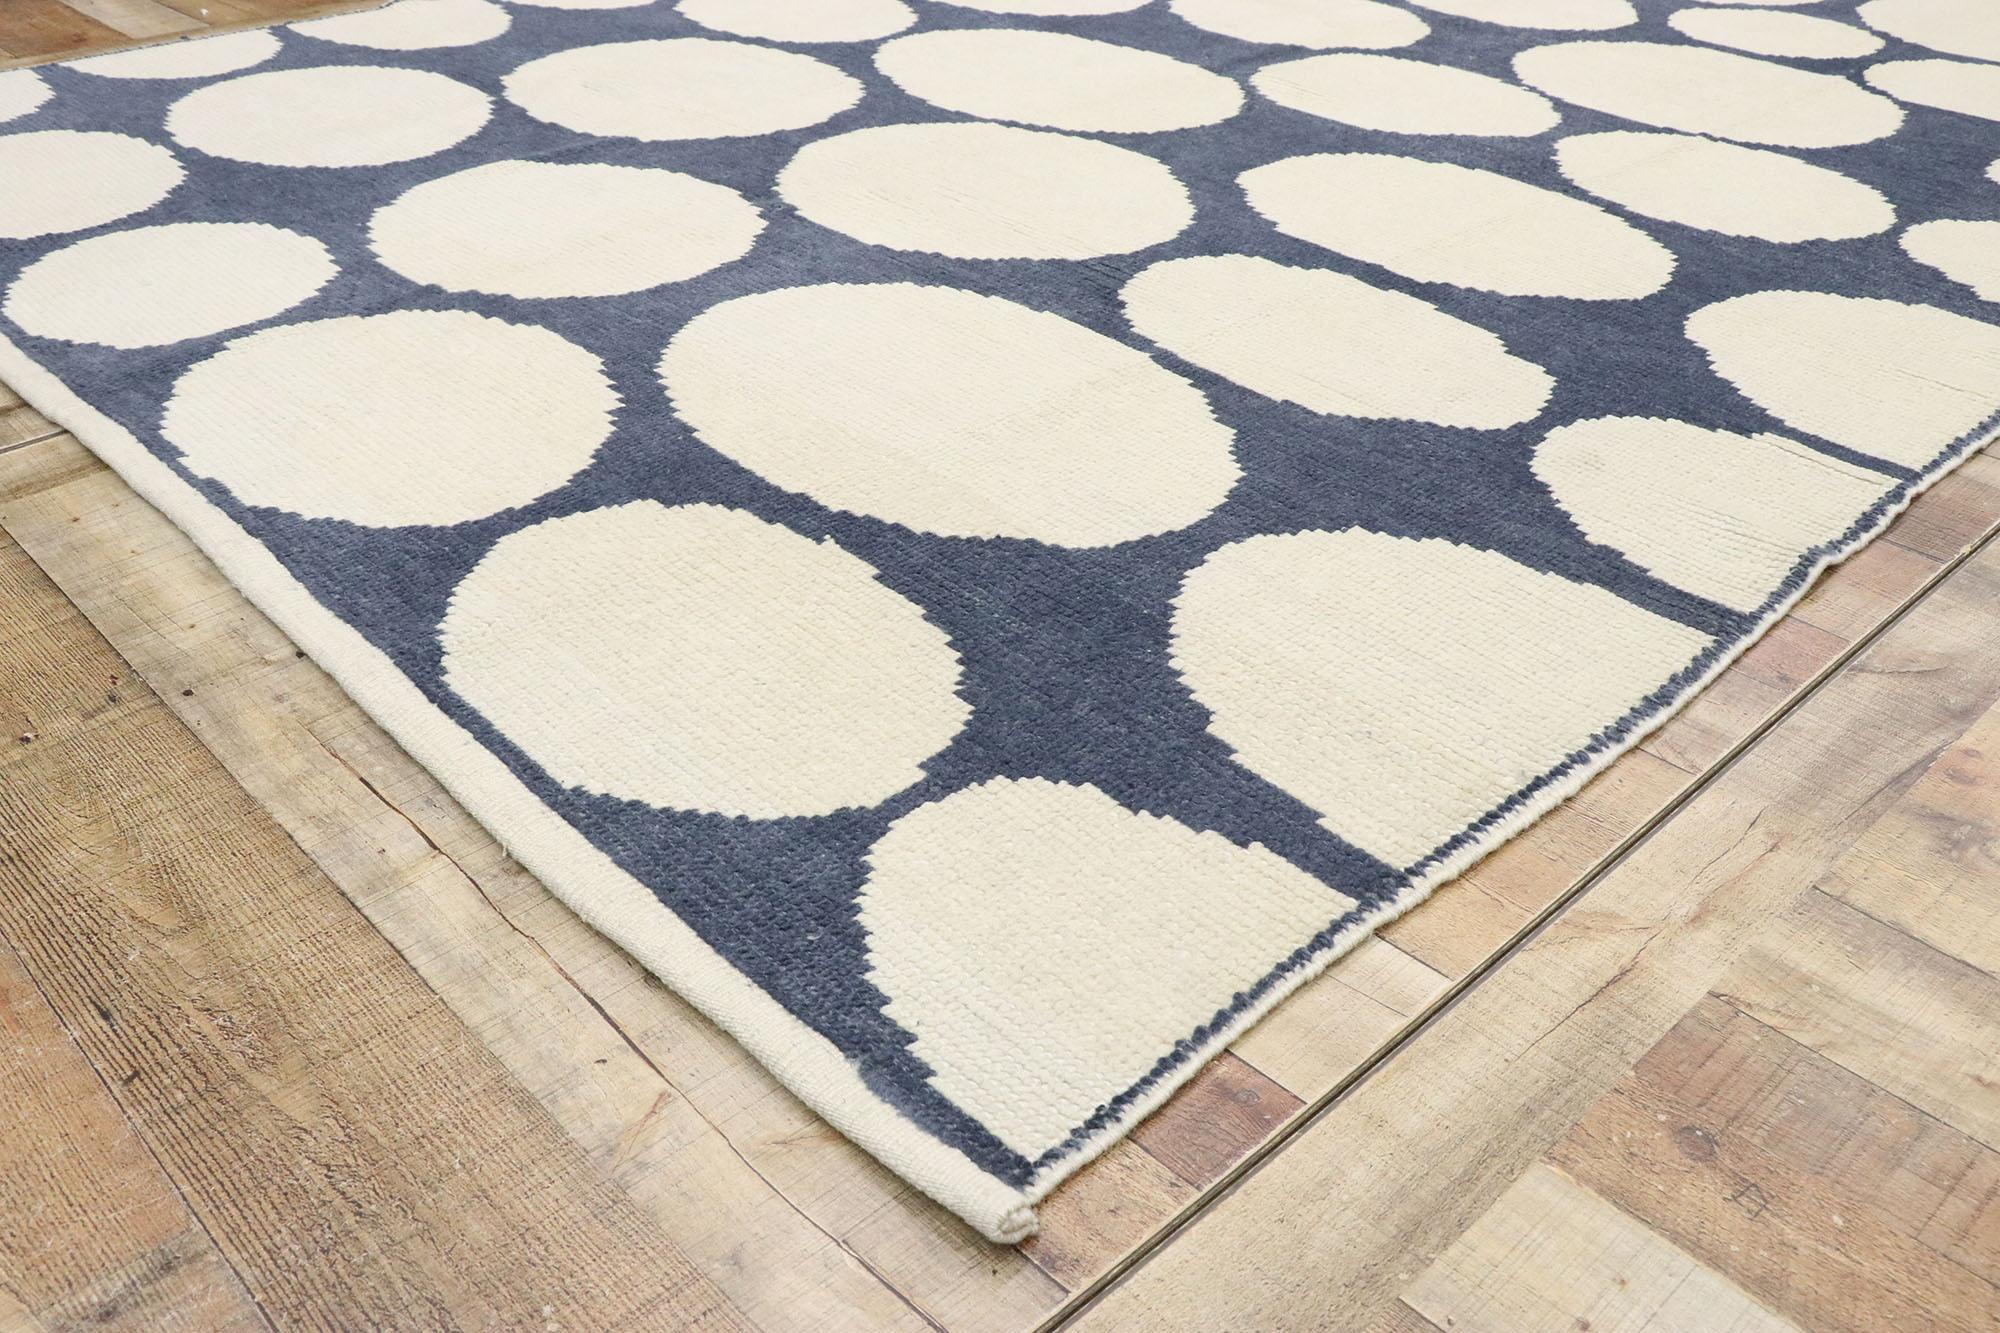 Space Age New Contemporary Moroccan Polka Dot Orphism Style Rug Inspired by Yayoi Kusama